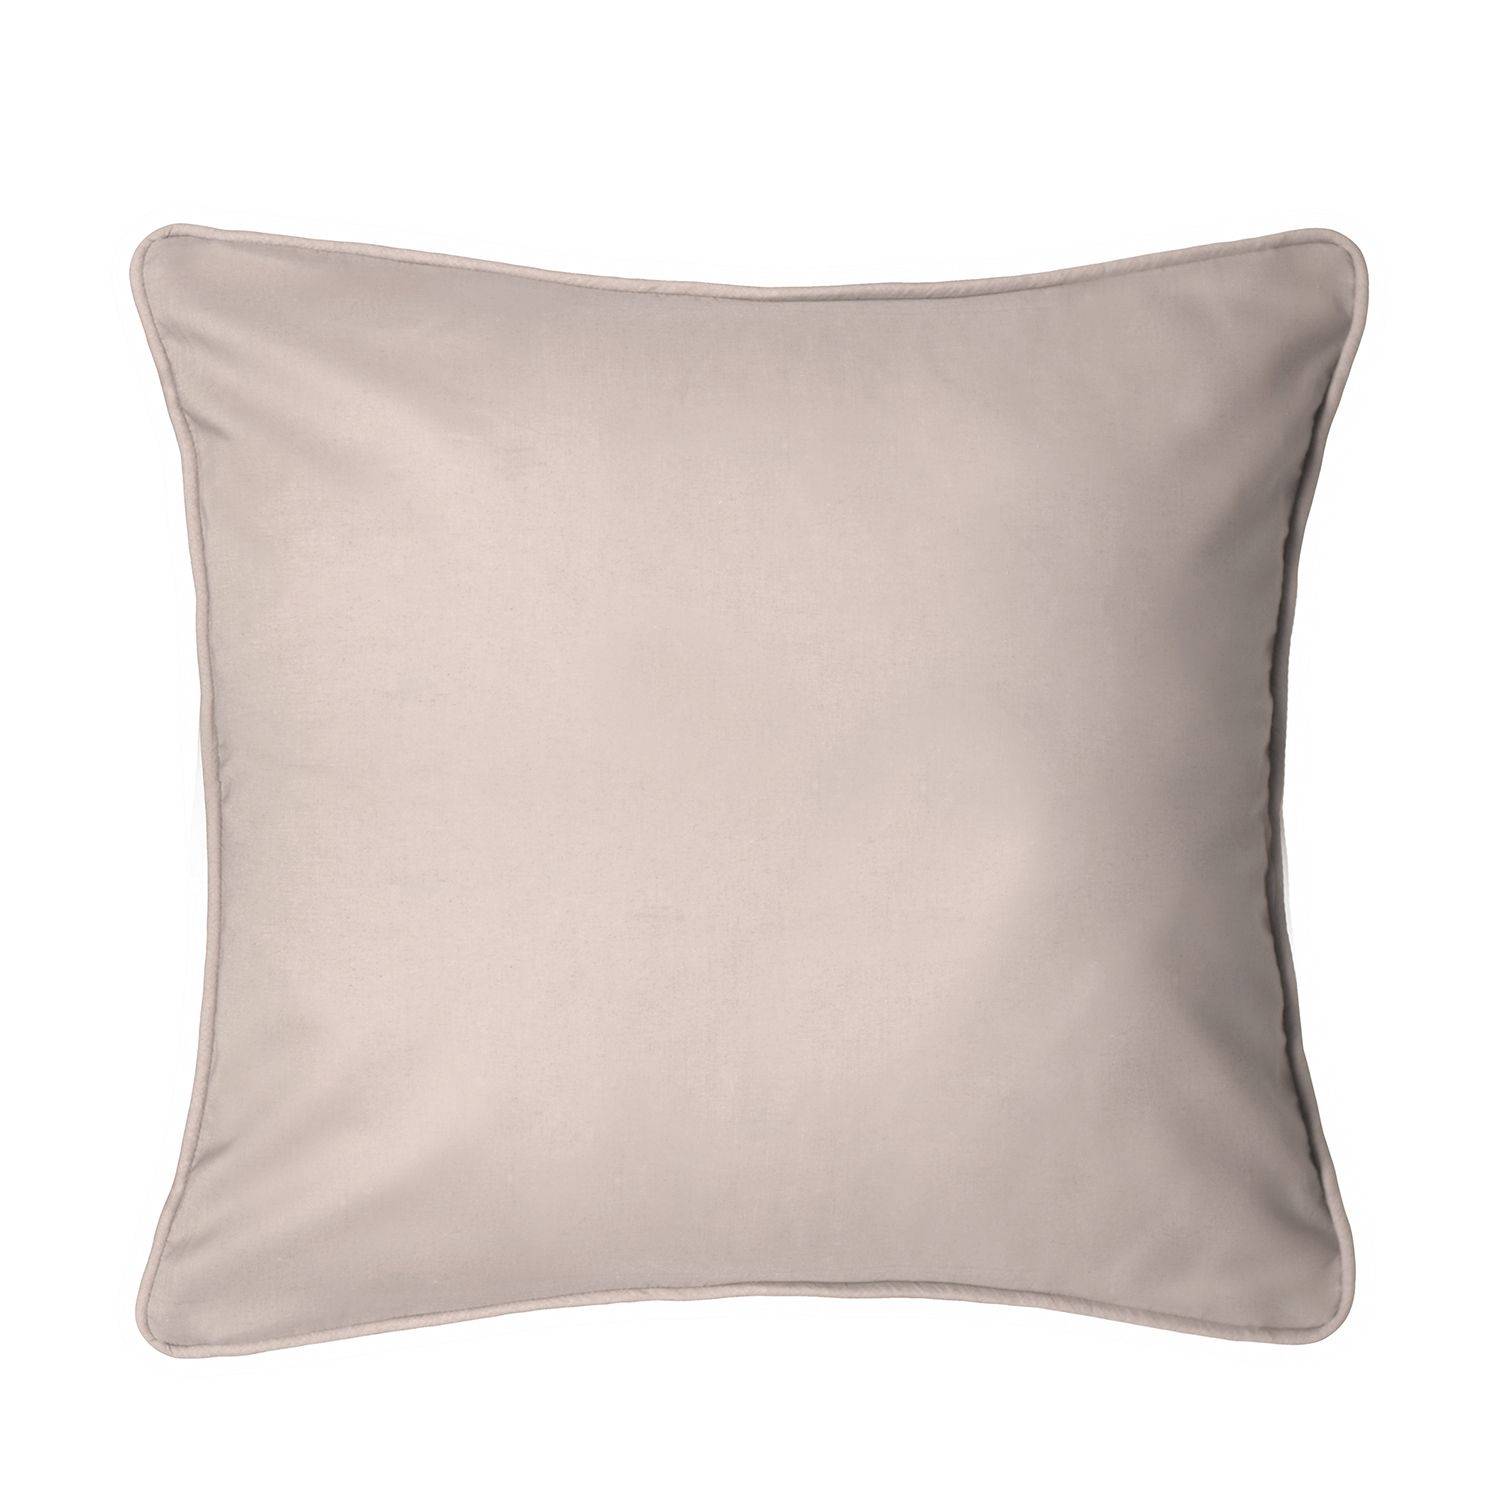 Image for Donna Sharp Smoky Taupe Euro Sham at Kohl's.